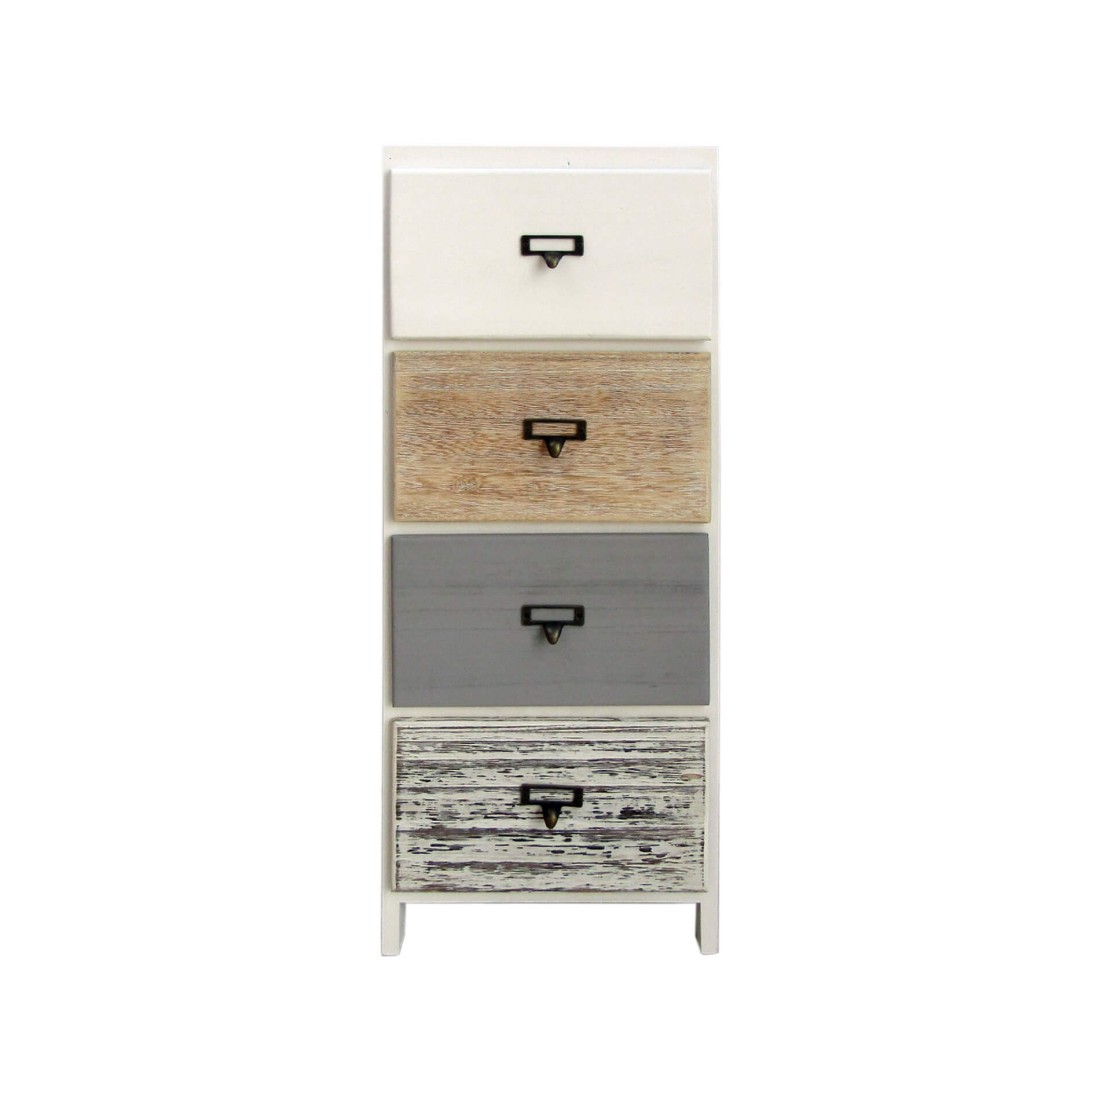 Arte povera bedside table with 4 colored drawers